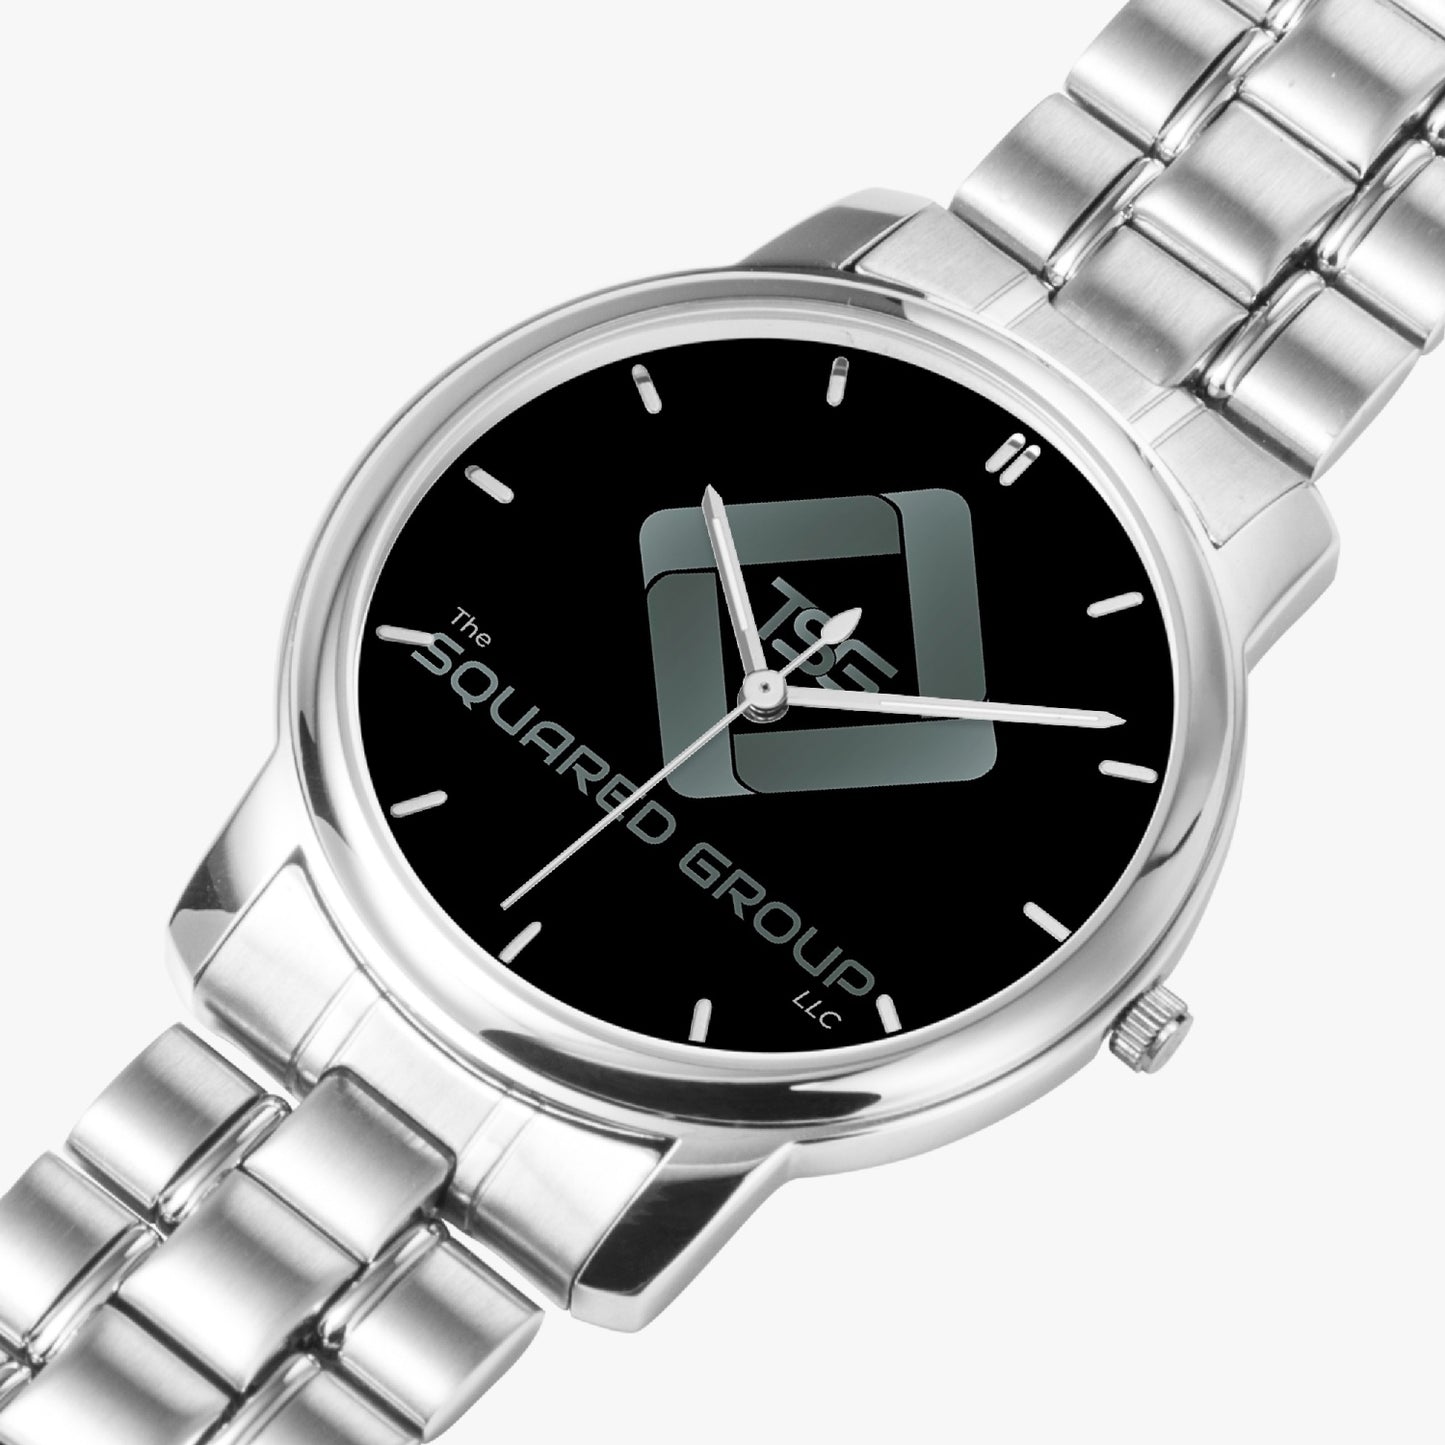 The Squared Group, LLC- Folding Clasp Type Stainless Steel Quartz Watch (With Indicators)